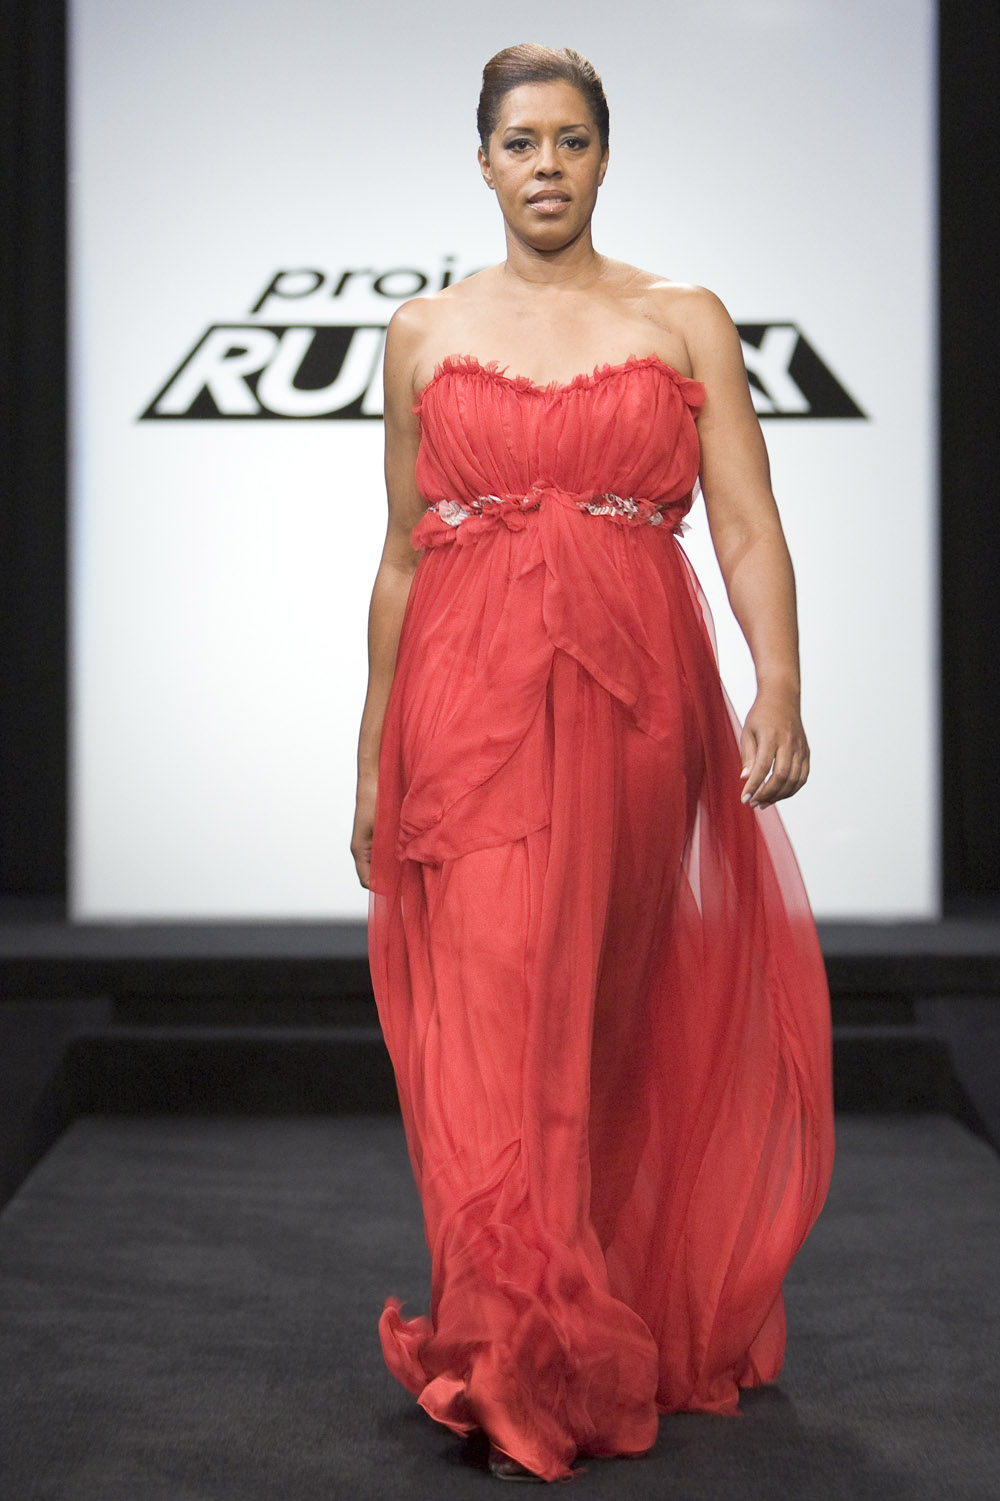 Project Runway’s “Design Your Heart Out” Red Dress Challenge Honors Heart Disease Survivors